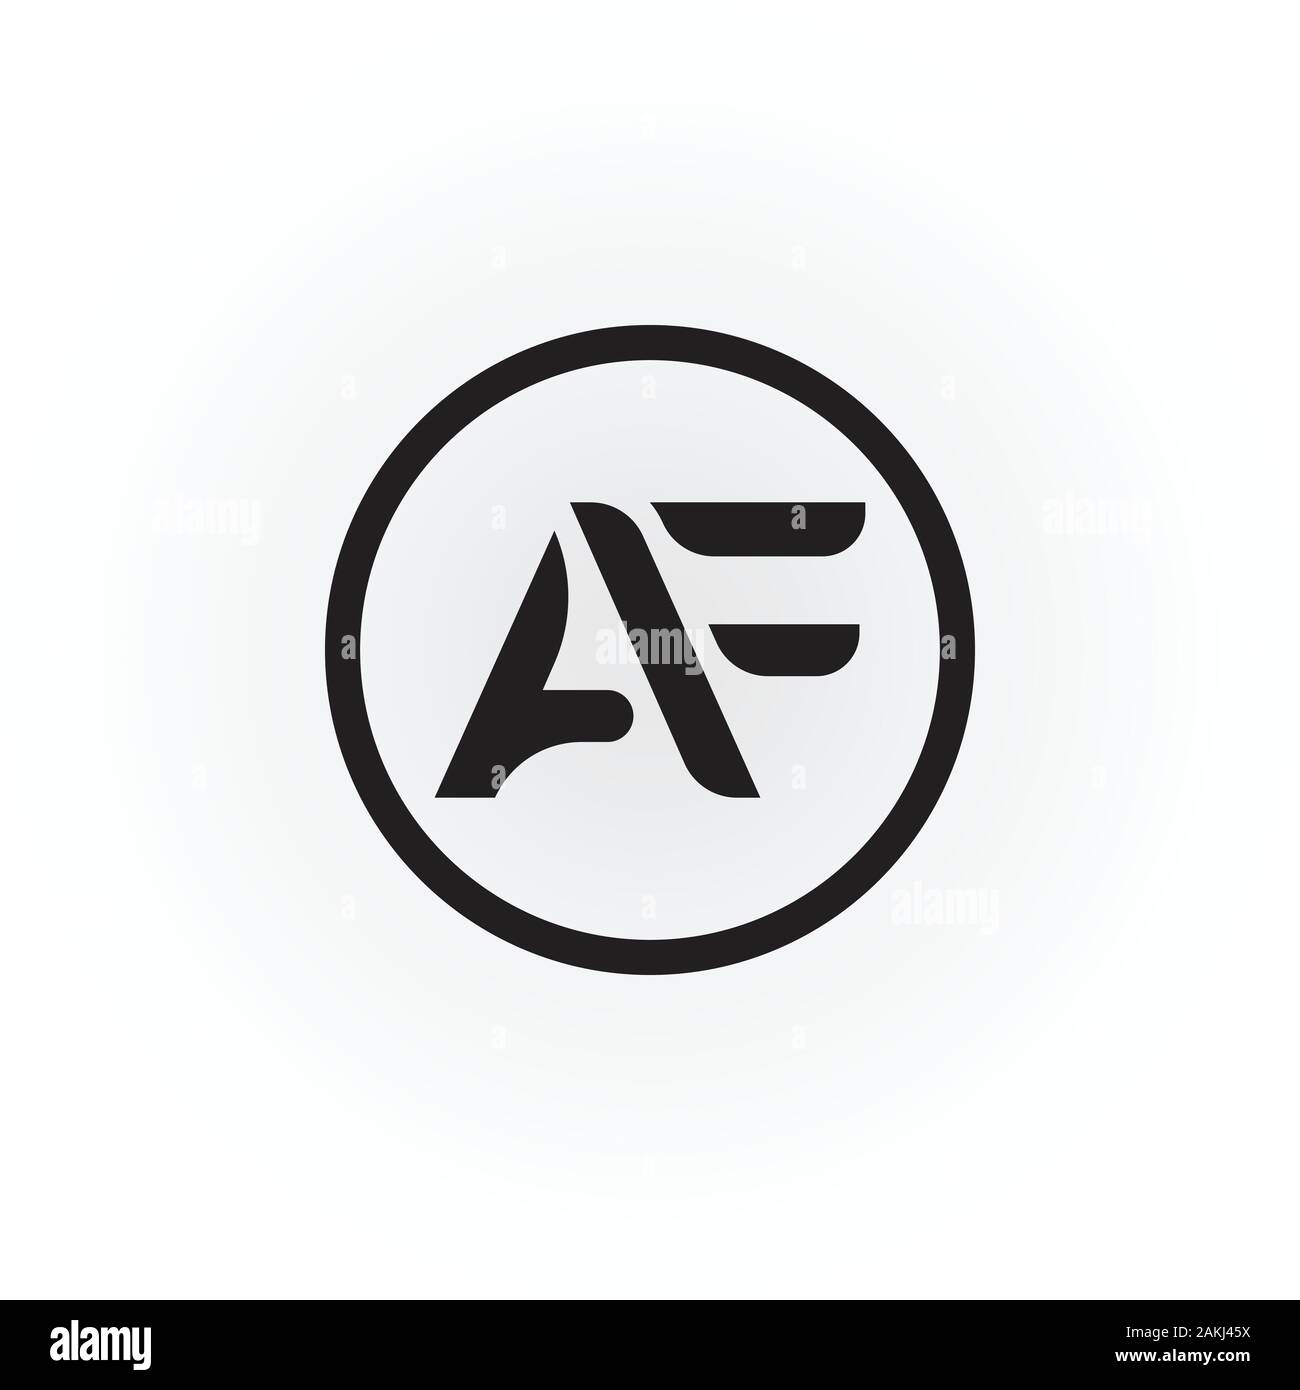 Initial AF Letter Logo With Creative Modern Business Typography Vector Template. Creative Abstract Letter AF Logo Vector. Stock Vector